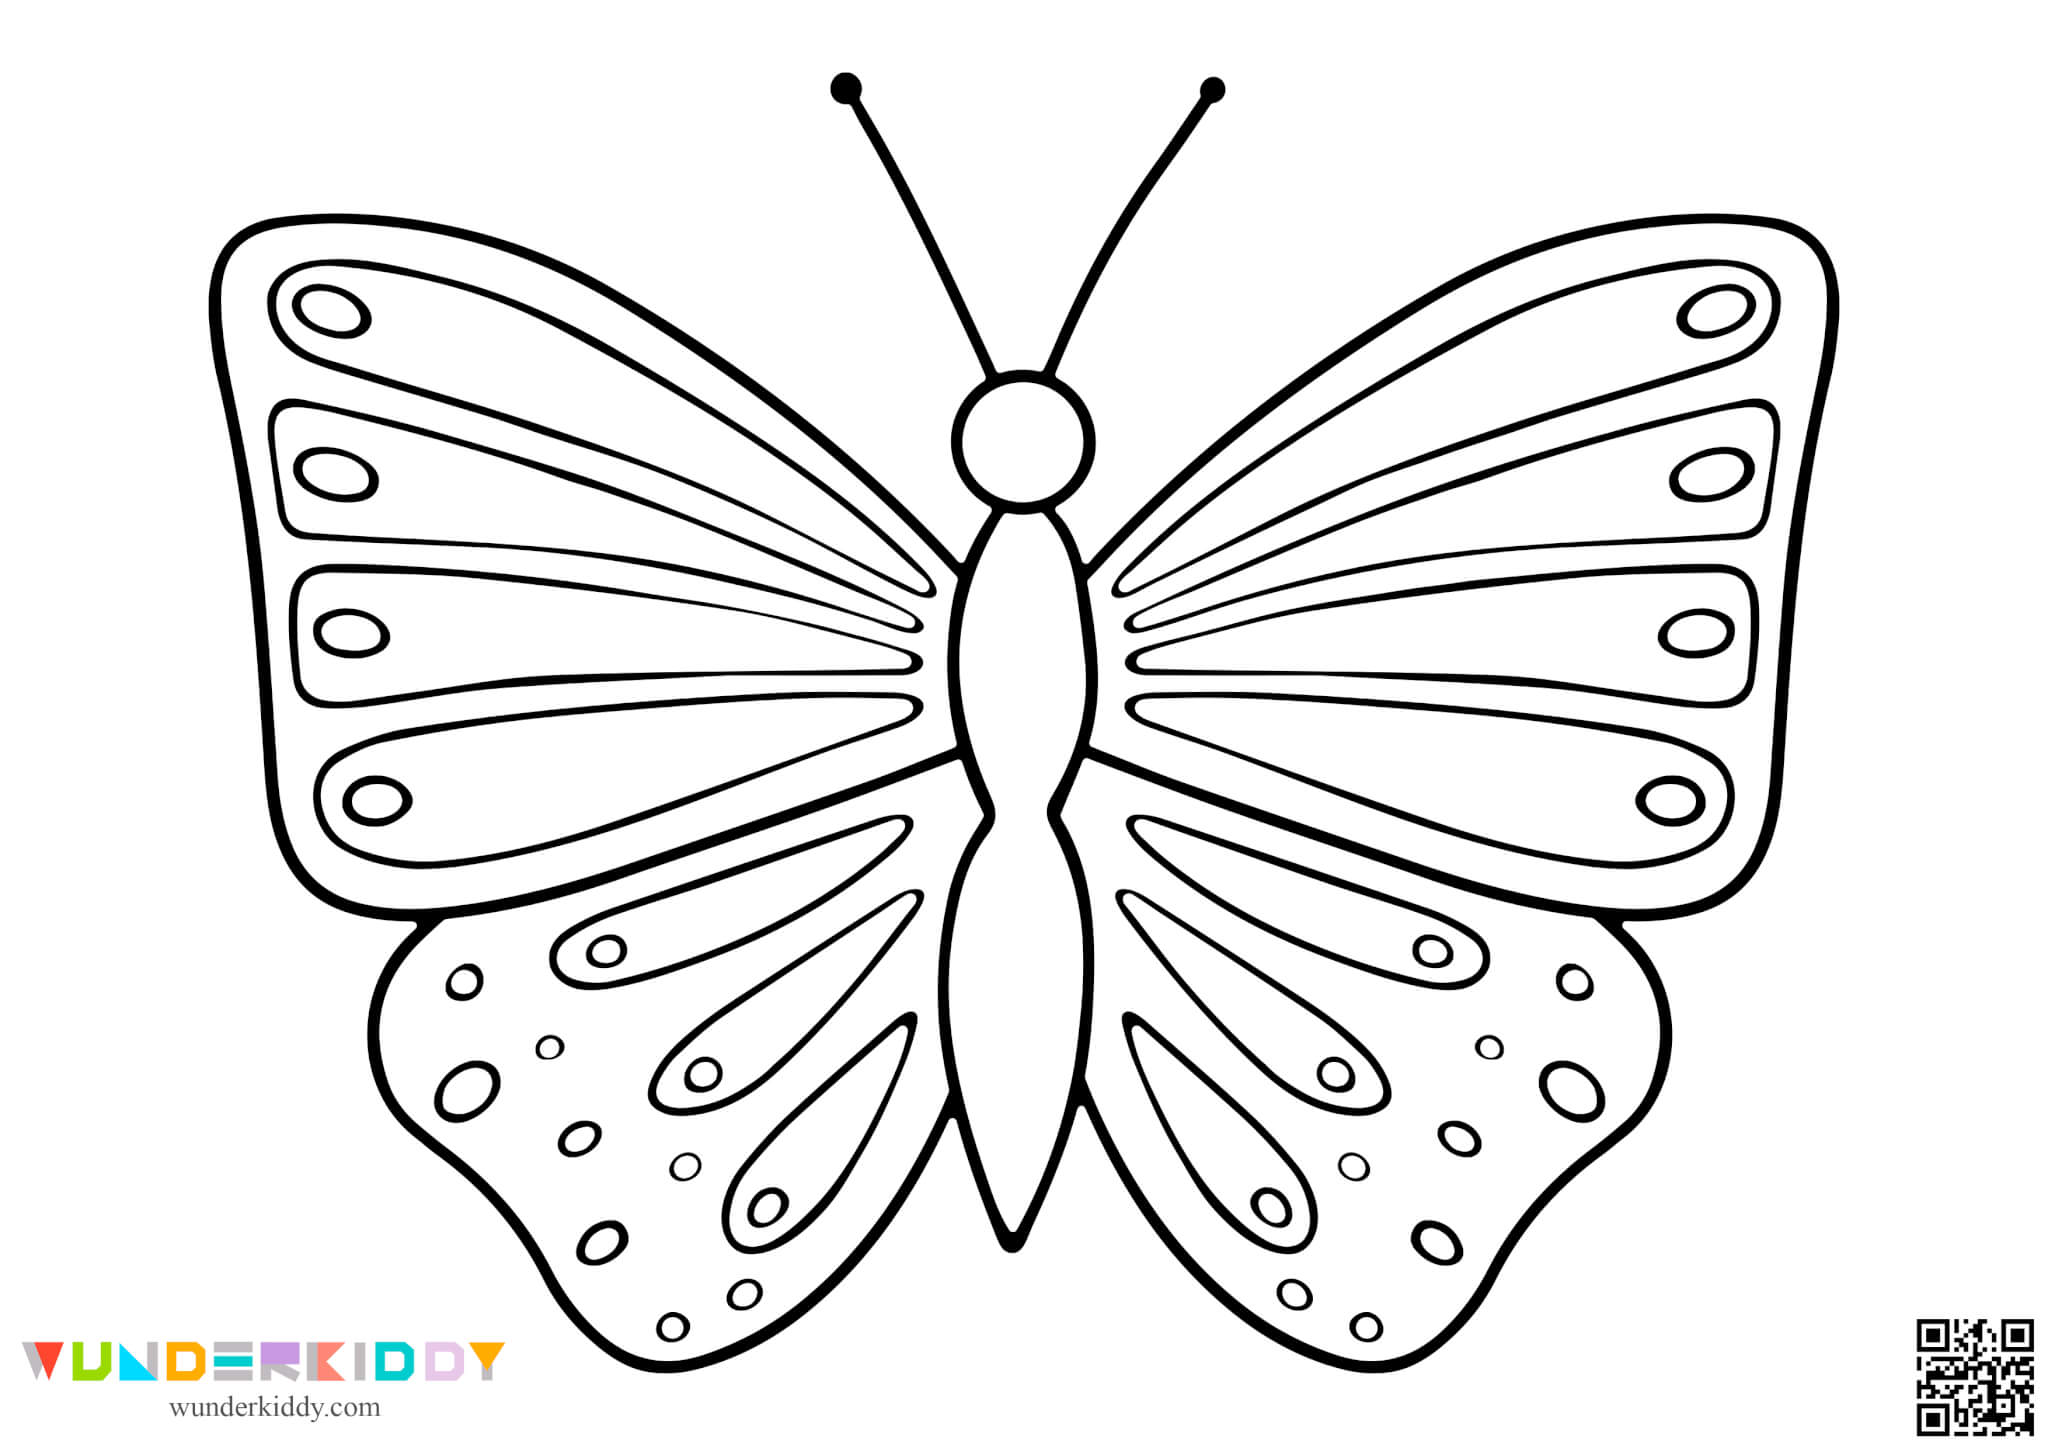 Butterfly Template Printable - Image 9